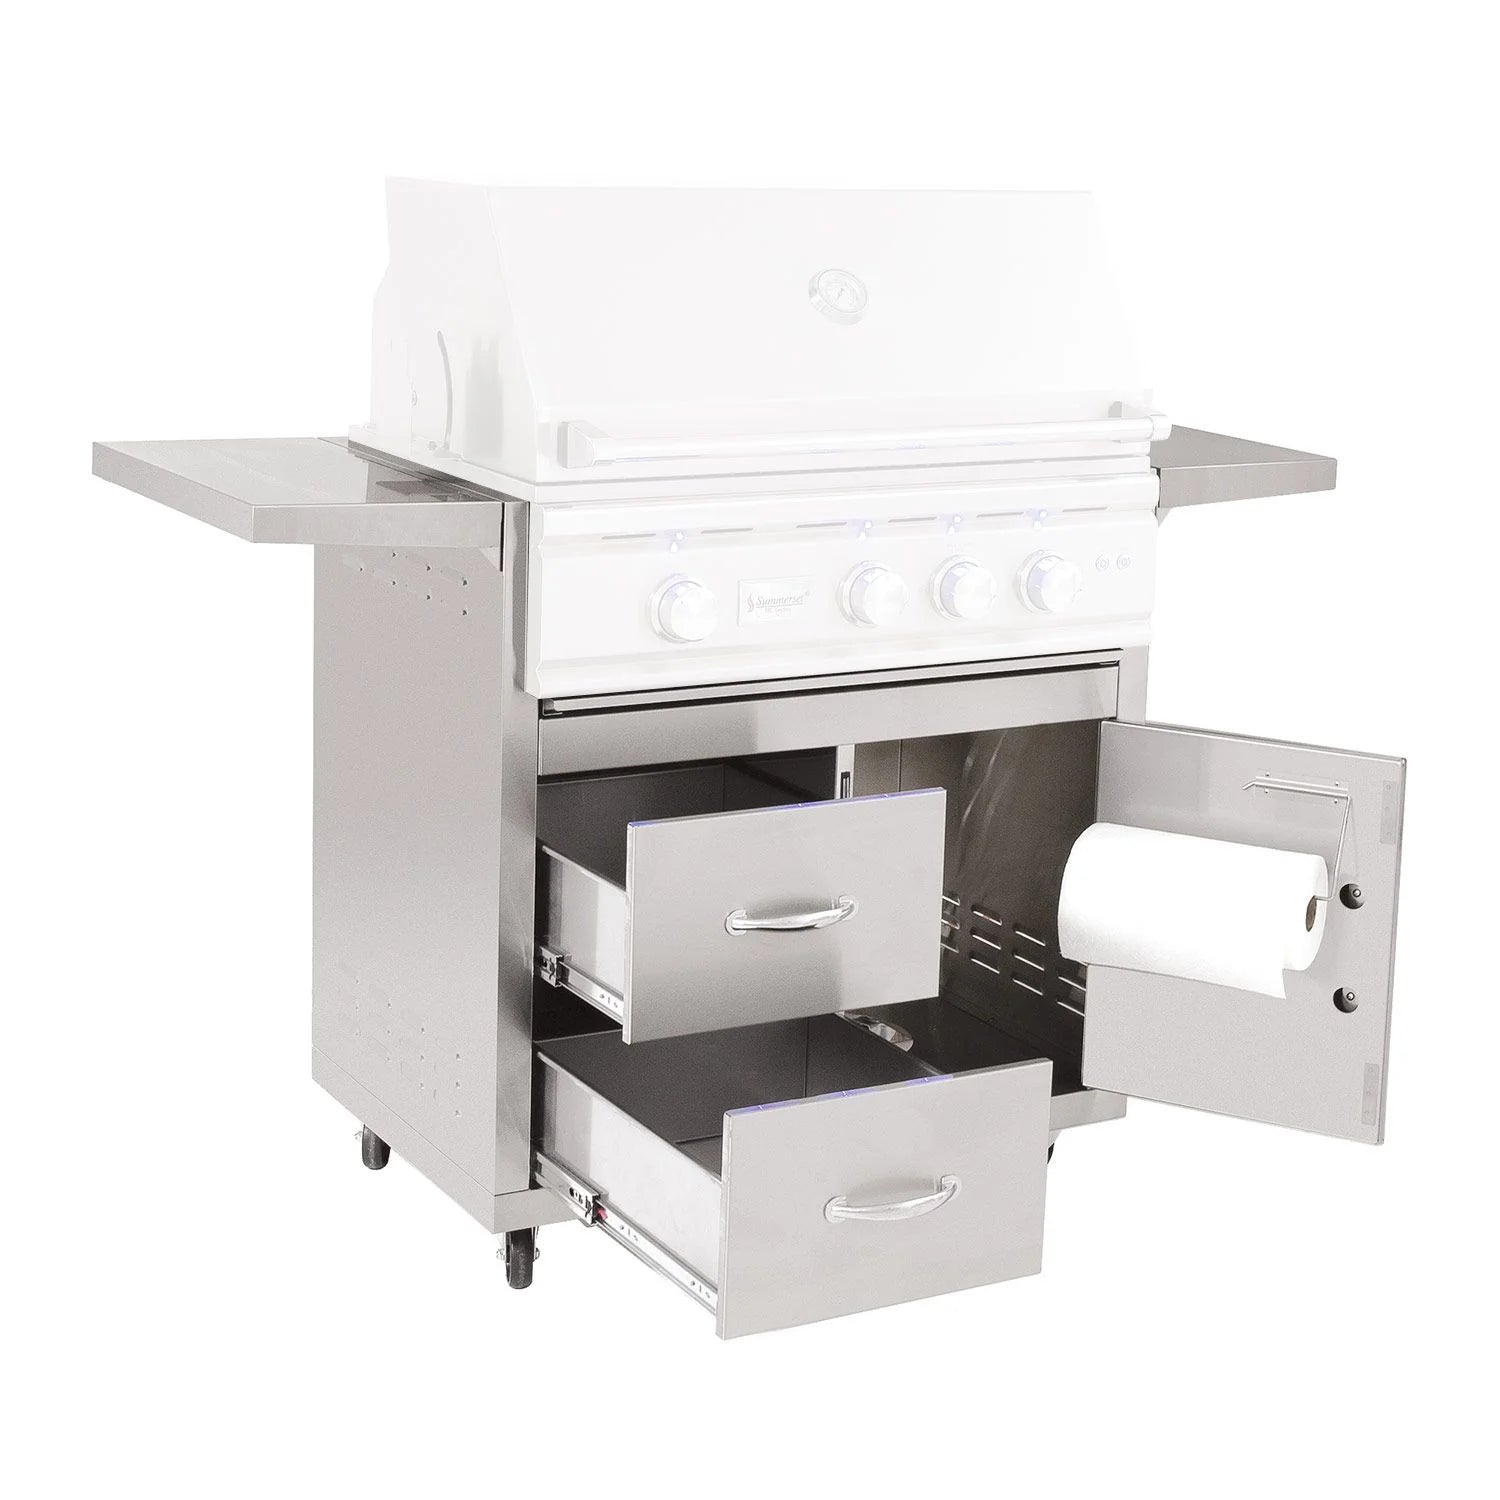 Summerset Deluxe Grill Cart For 32 Inch TRL Gas Grills - CART-TRL32-DC